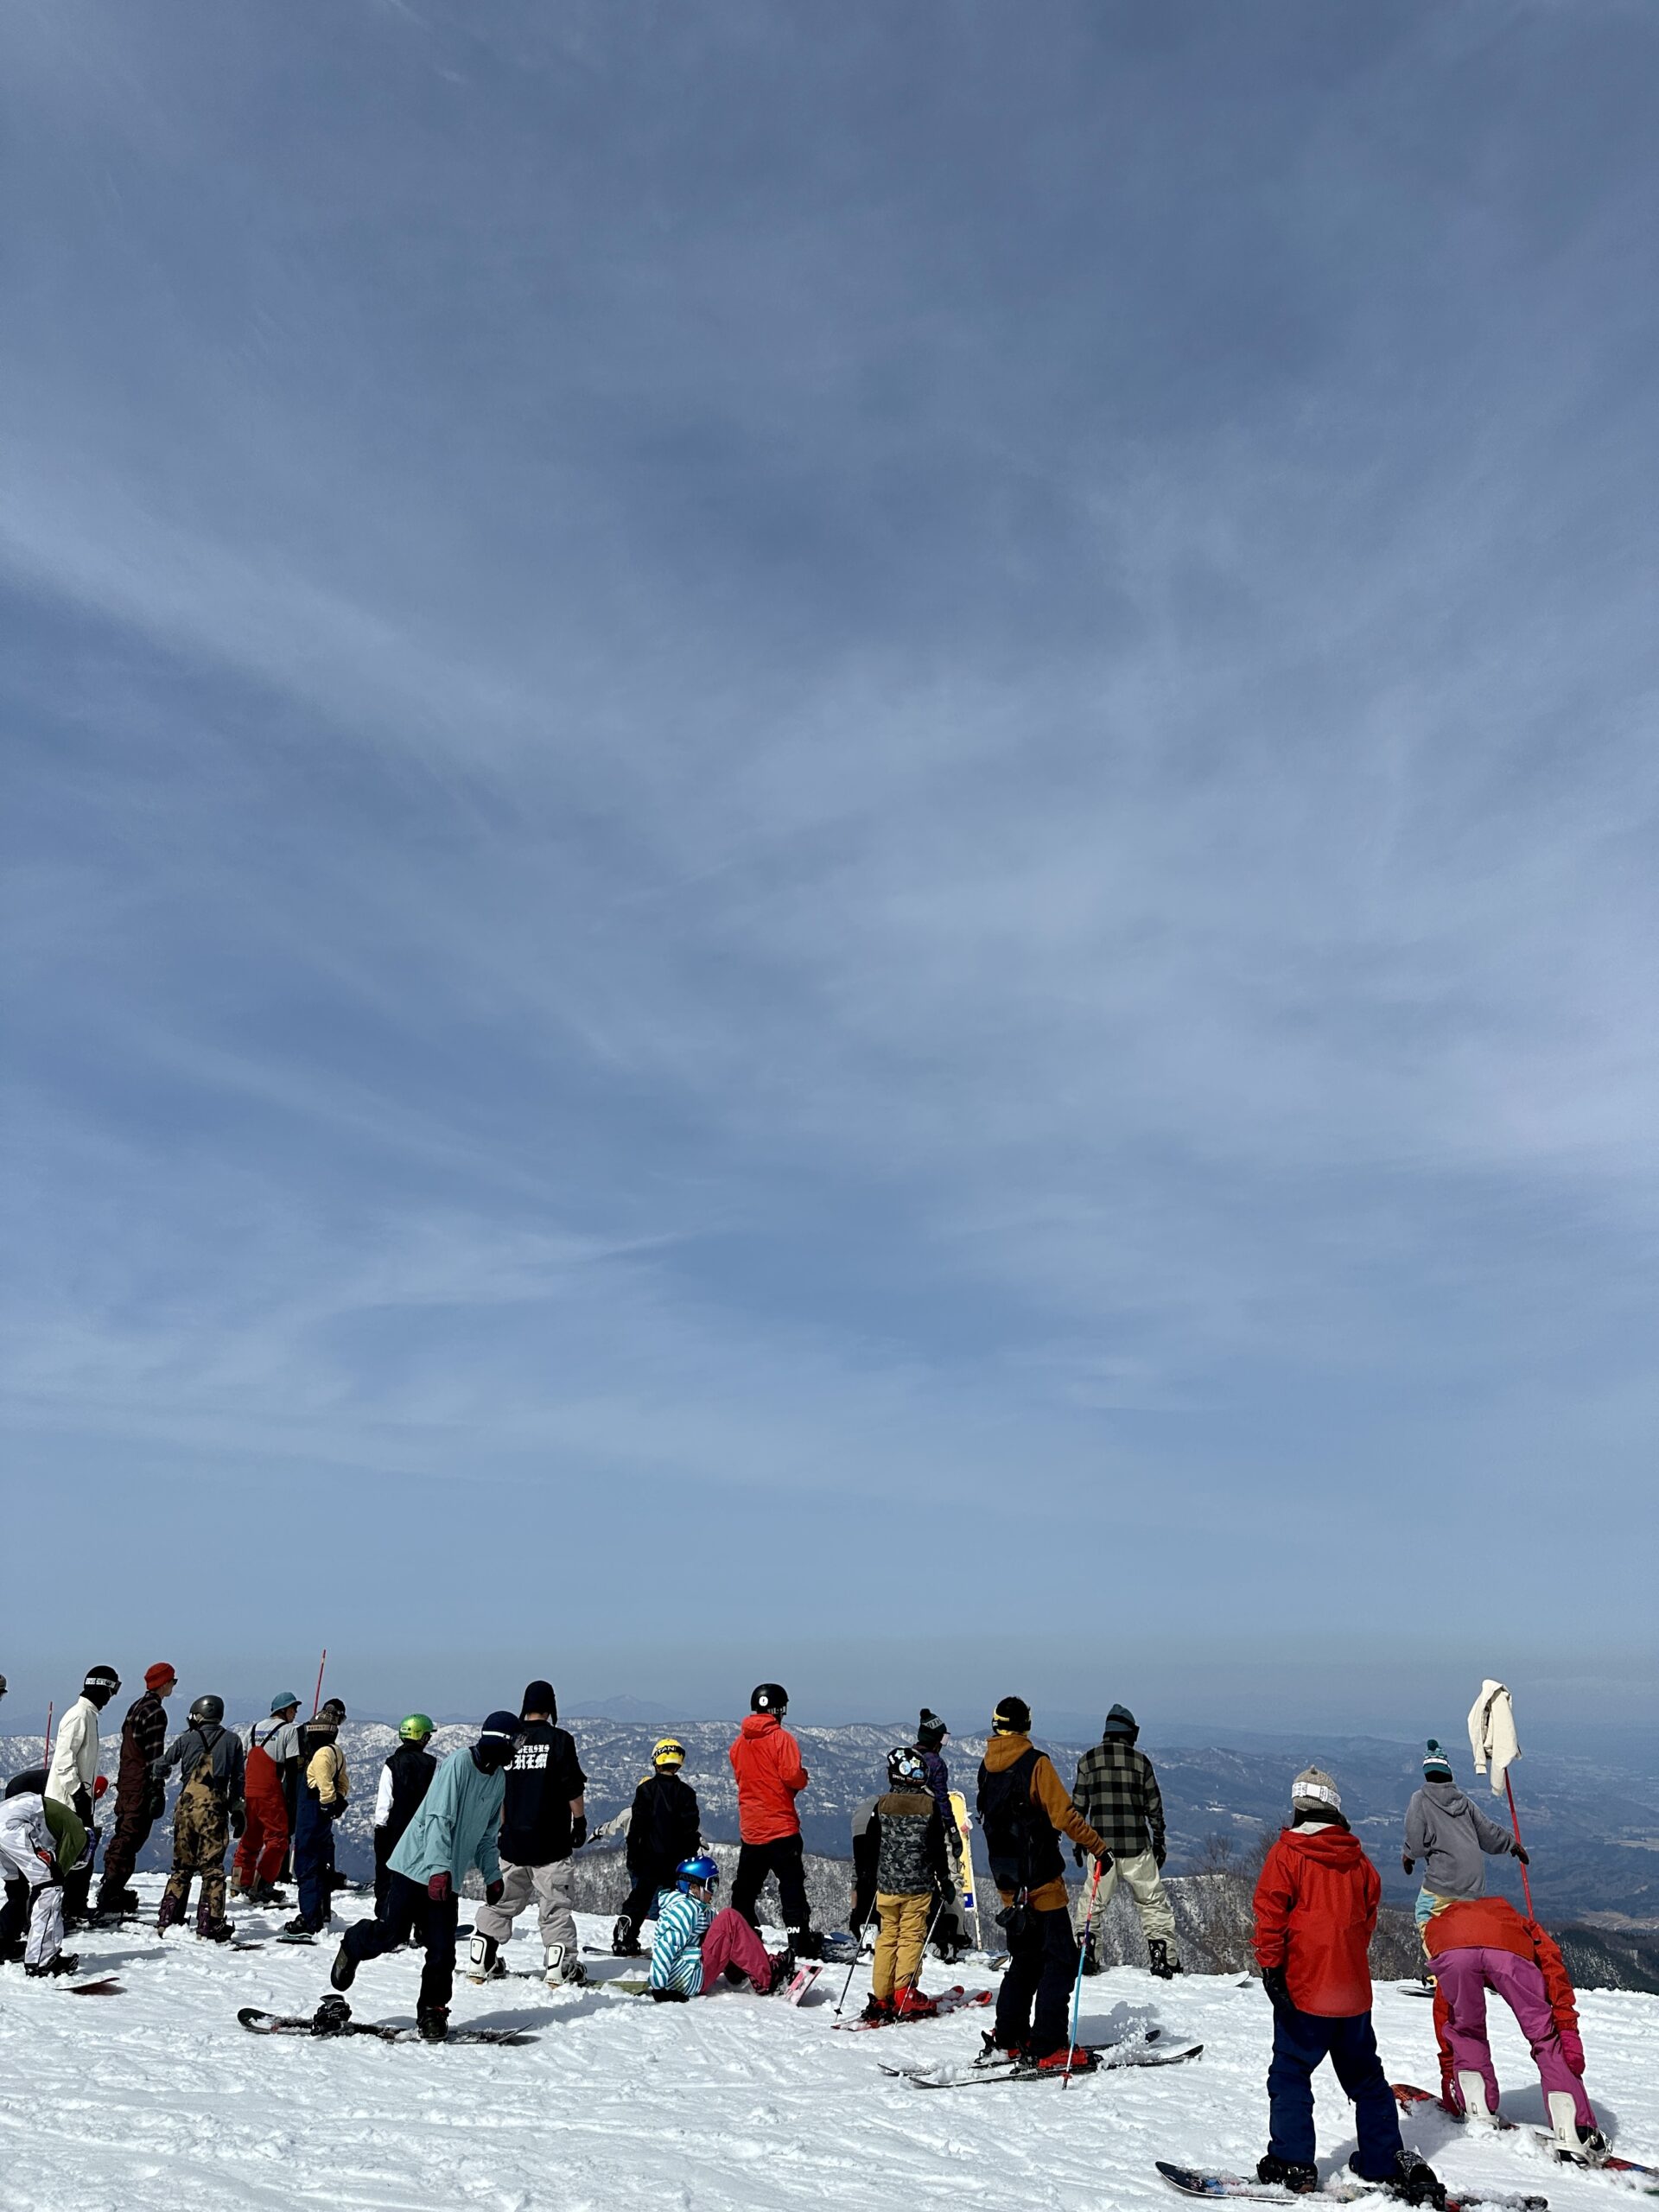 Skiers and snowboarders enjoying the clear sky weather with scenic views from Yamabiko 